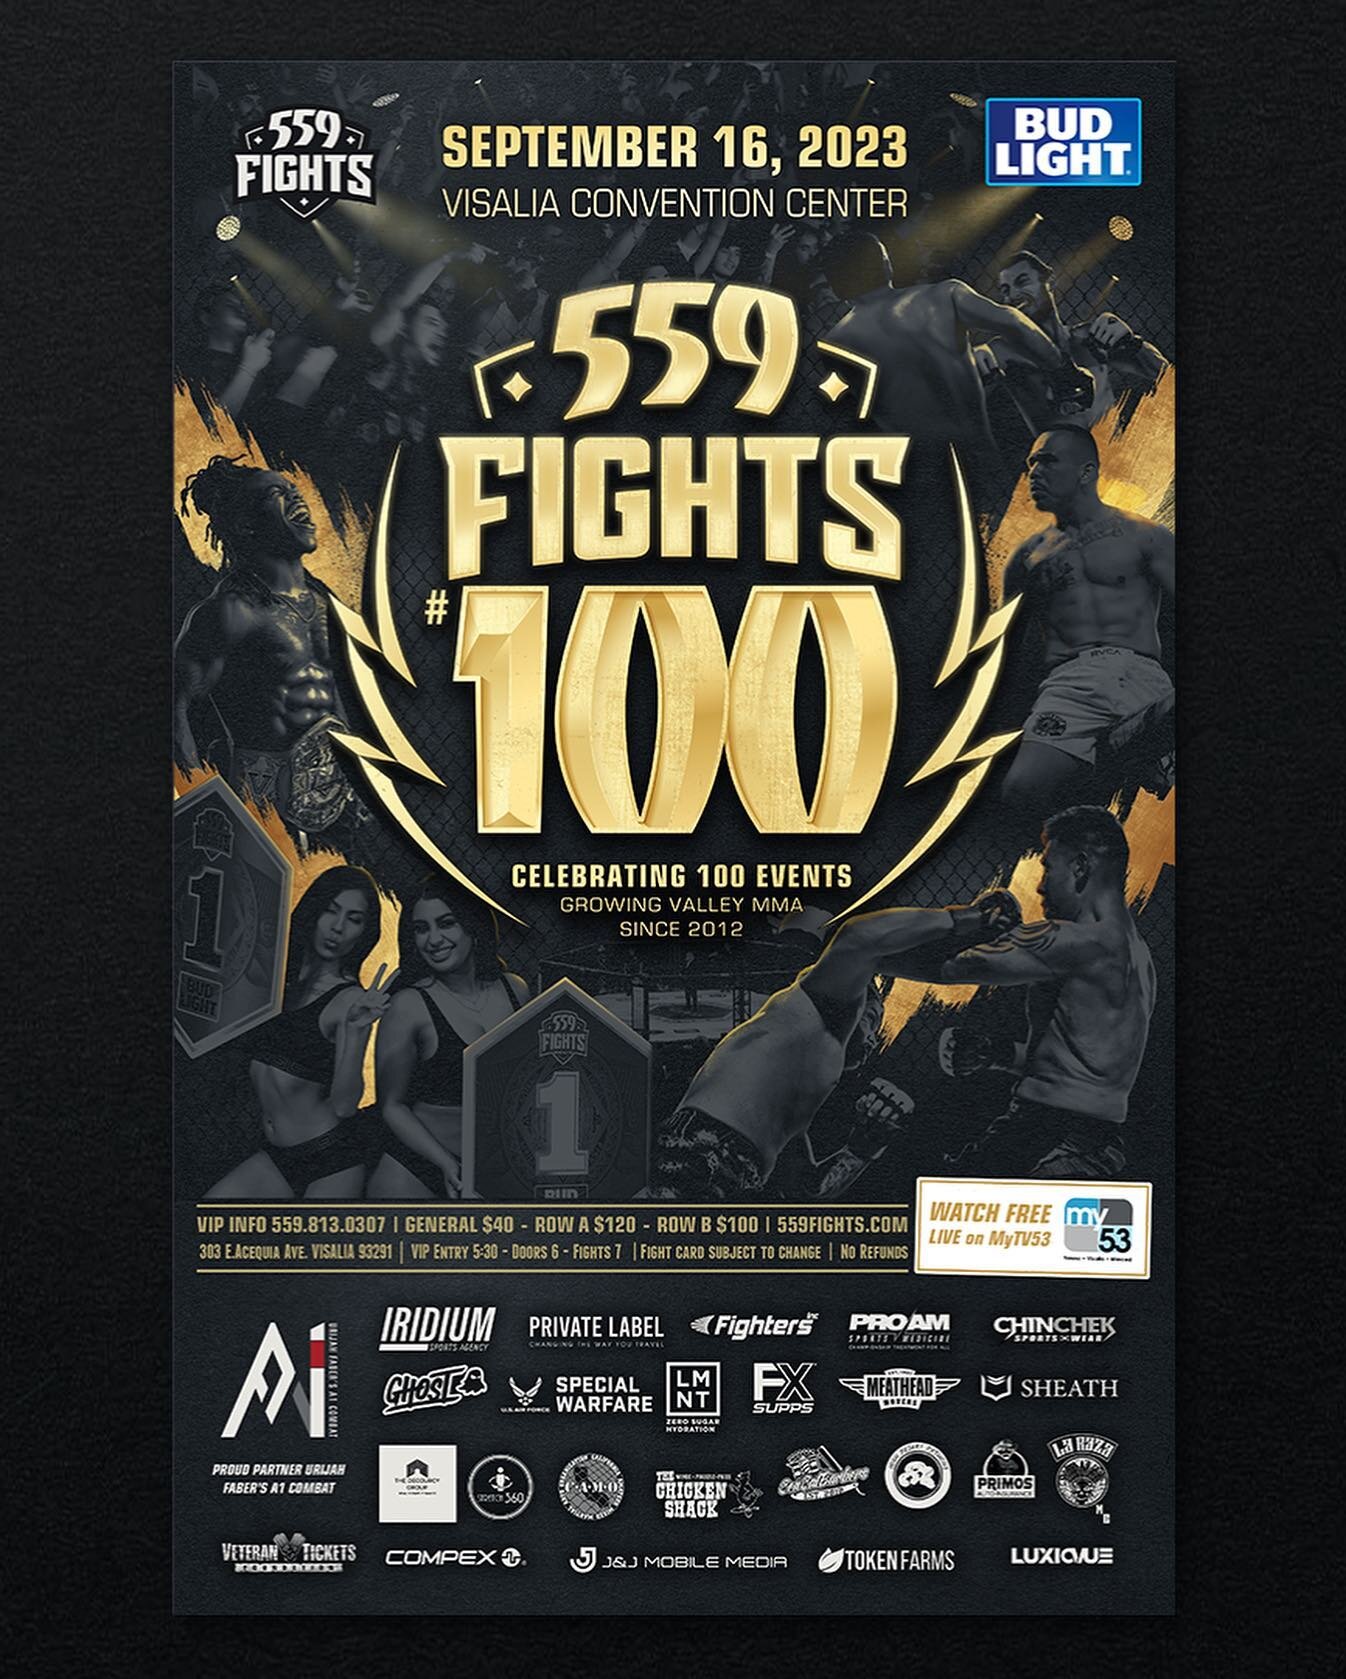 100 events!
559 Fights is celebrating their 100th live MMA event in September and I am very very proud to have been a part of it since the very beginning.

Many many thanks and huge congratulations to the homie @jluchau and the 559 Fights family for 